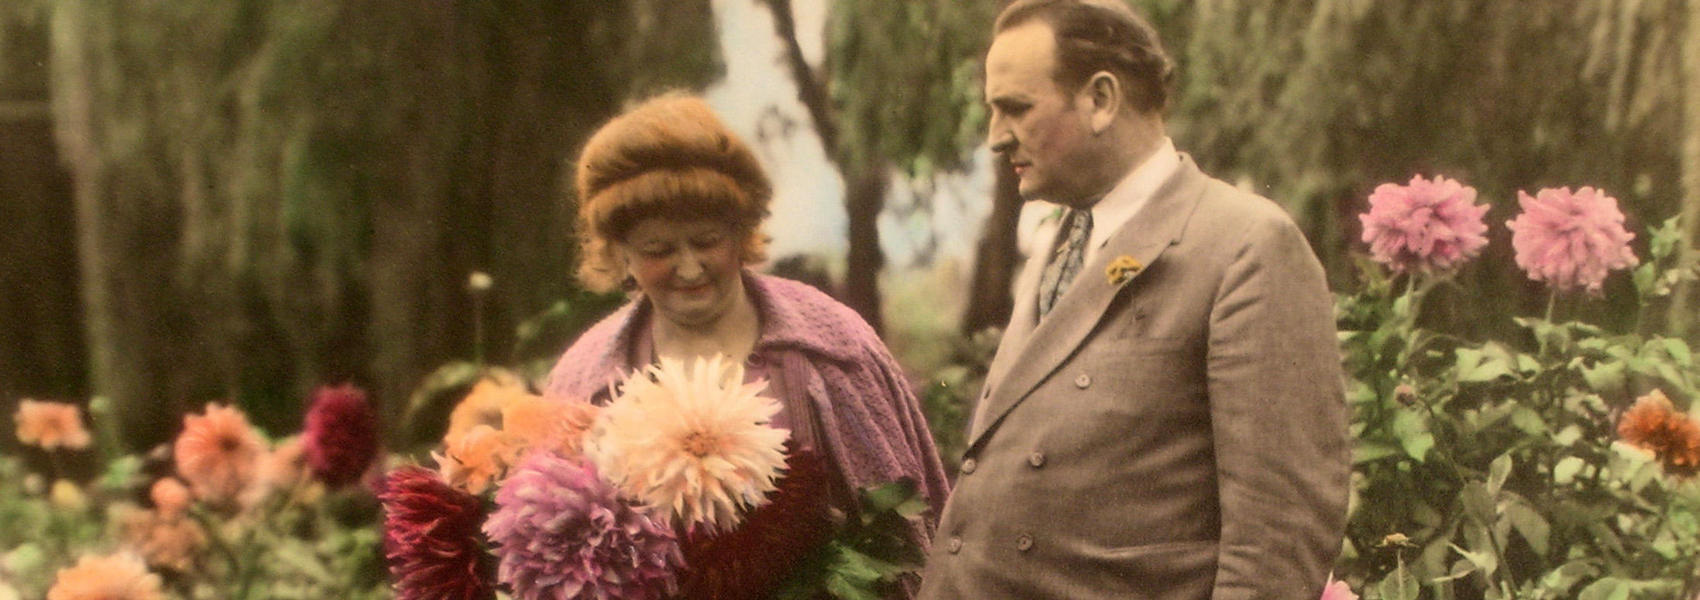 Color phot of Clyde and Carrie Tingley in garden, Carrie holding flowers